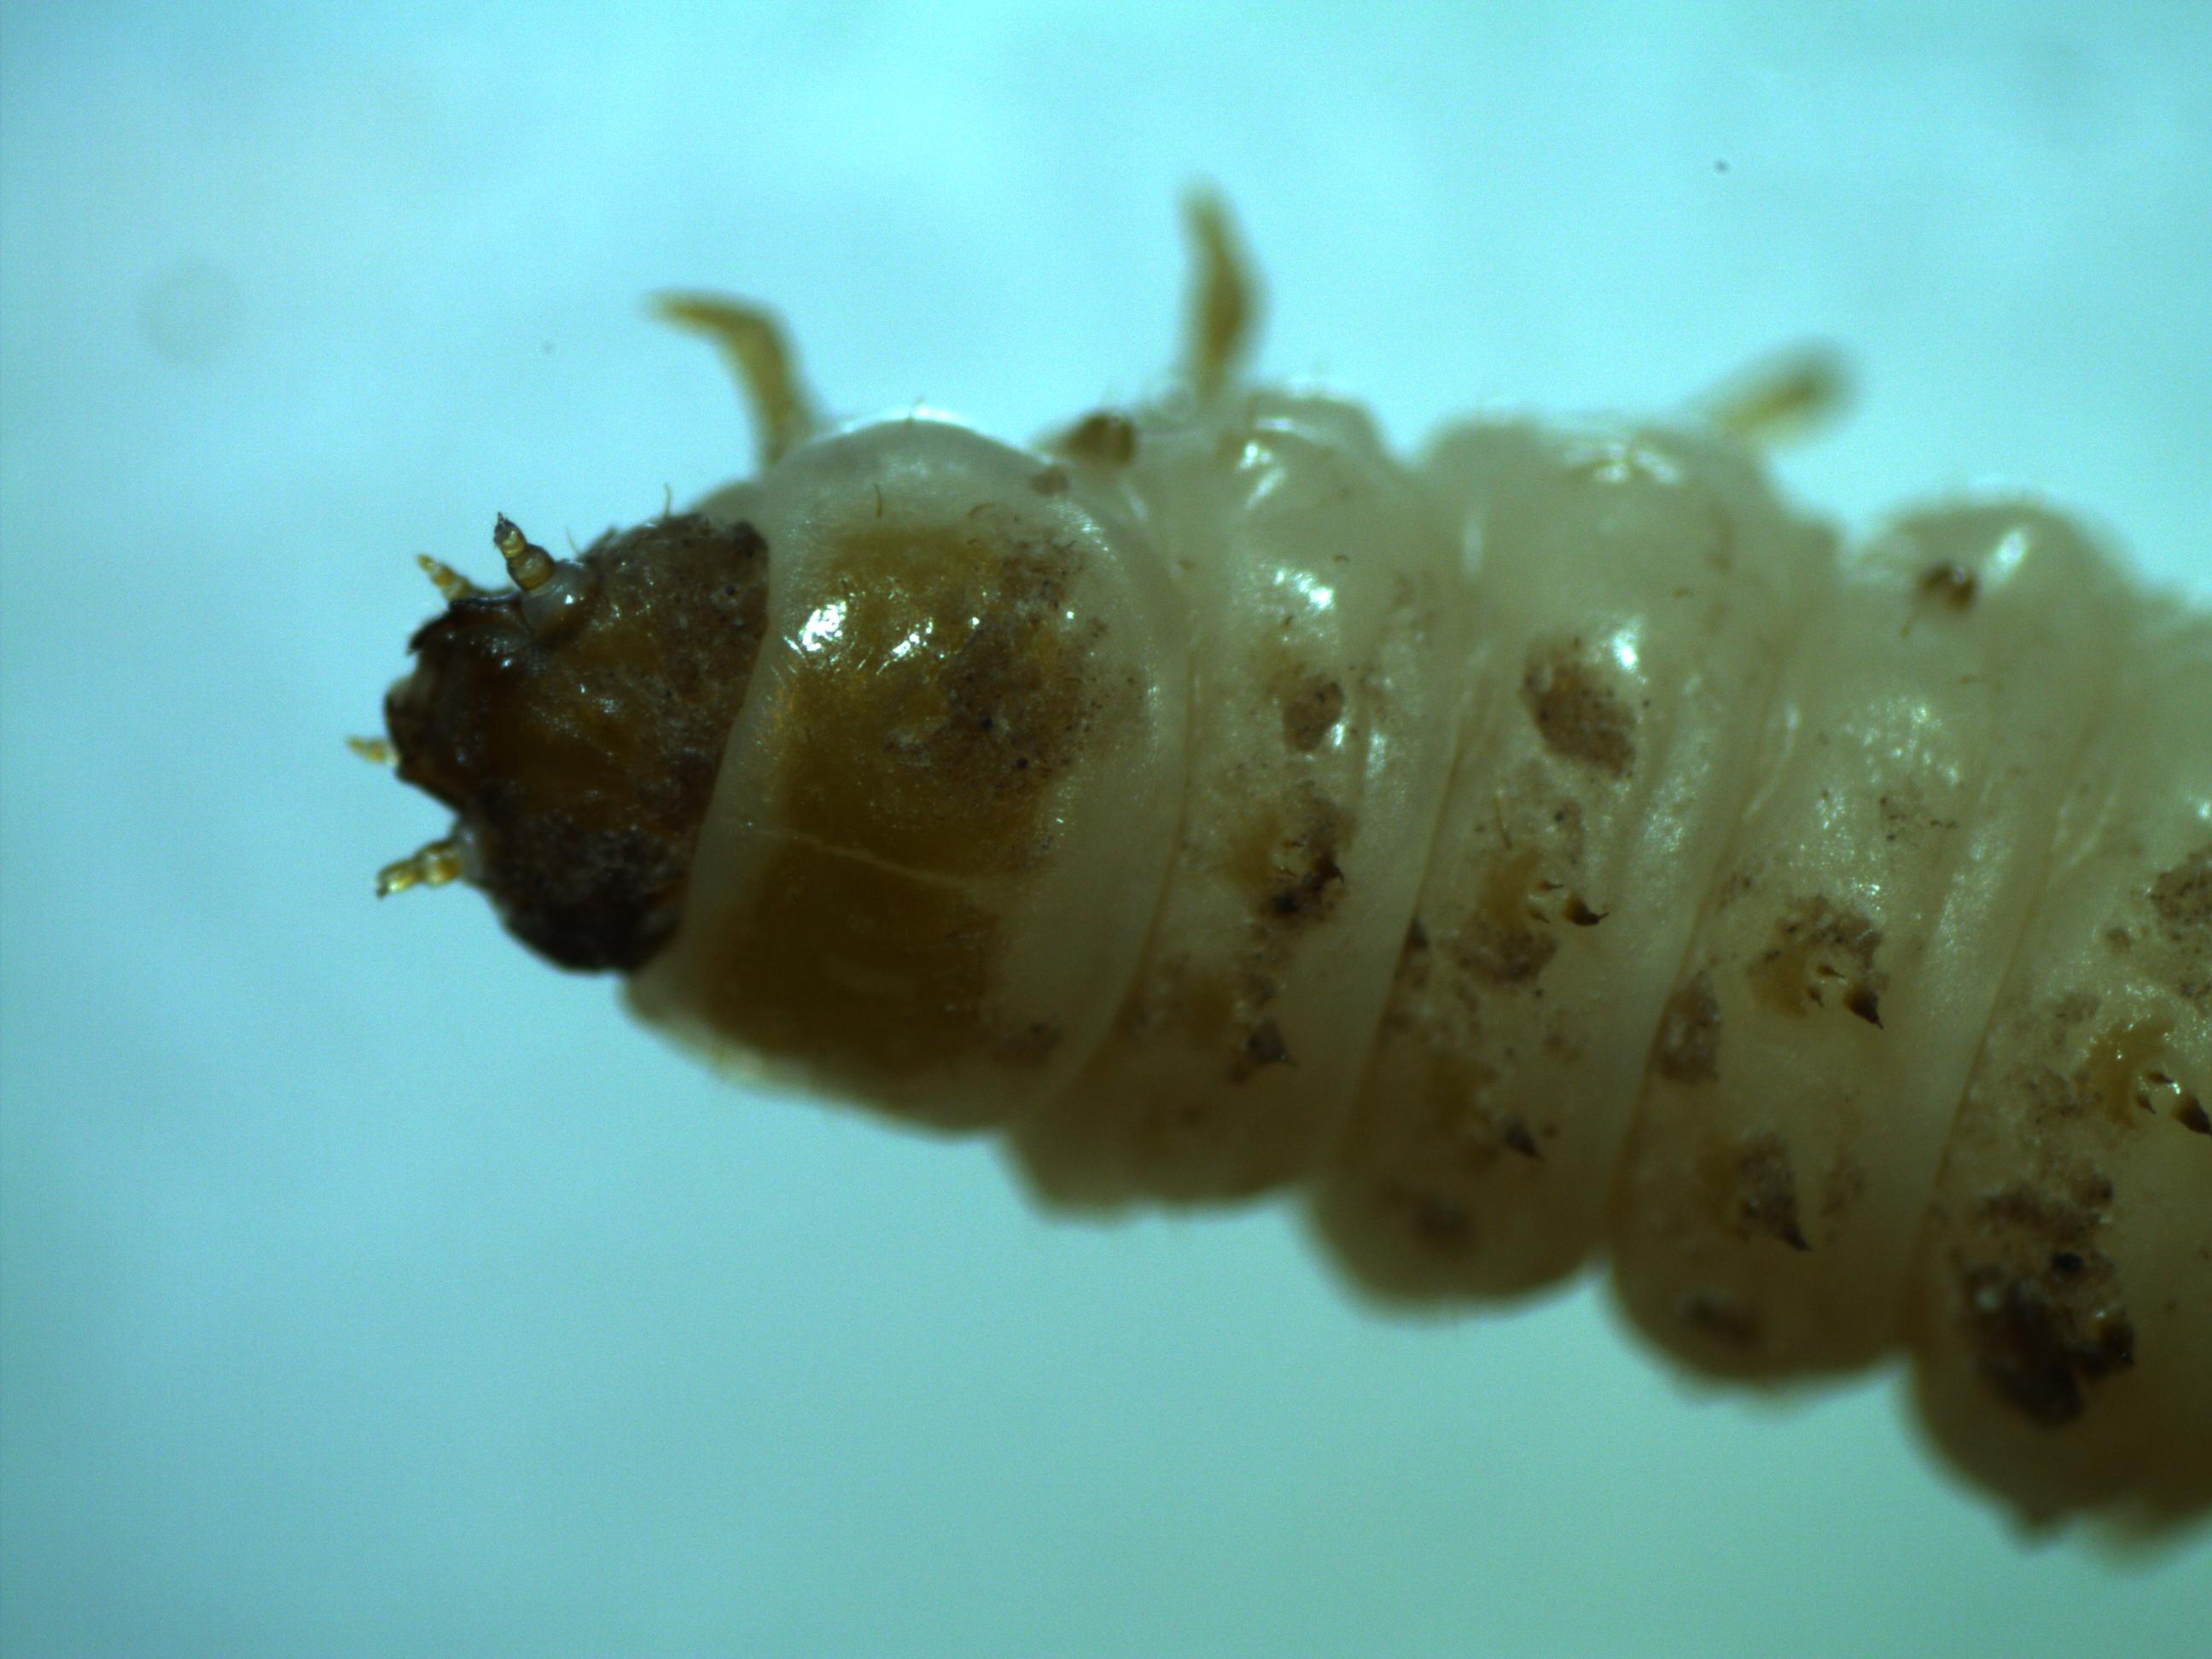 Small hive beetle larvae have three sets of legs located behind a brown, hardened head